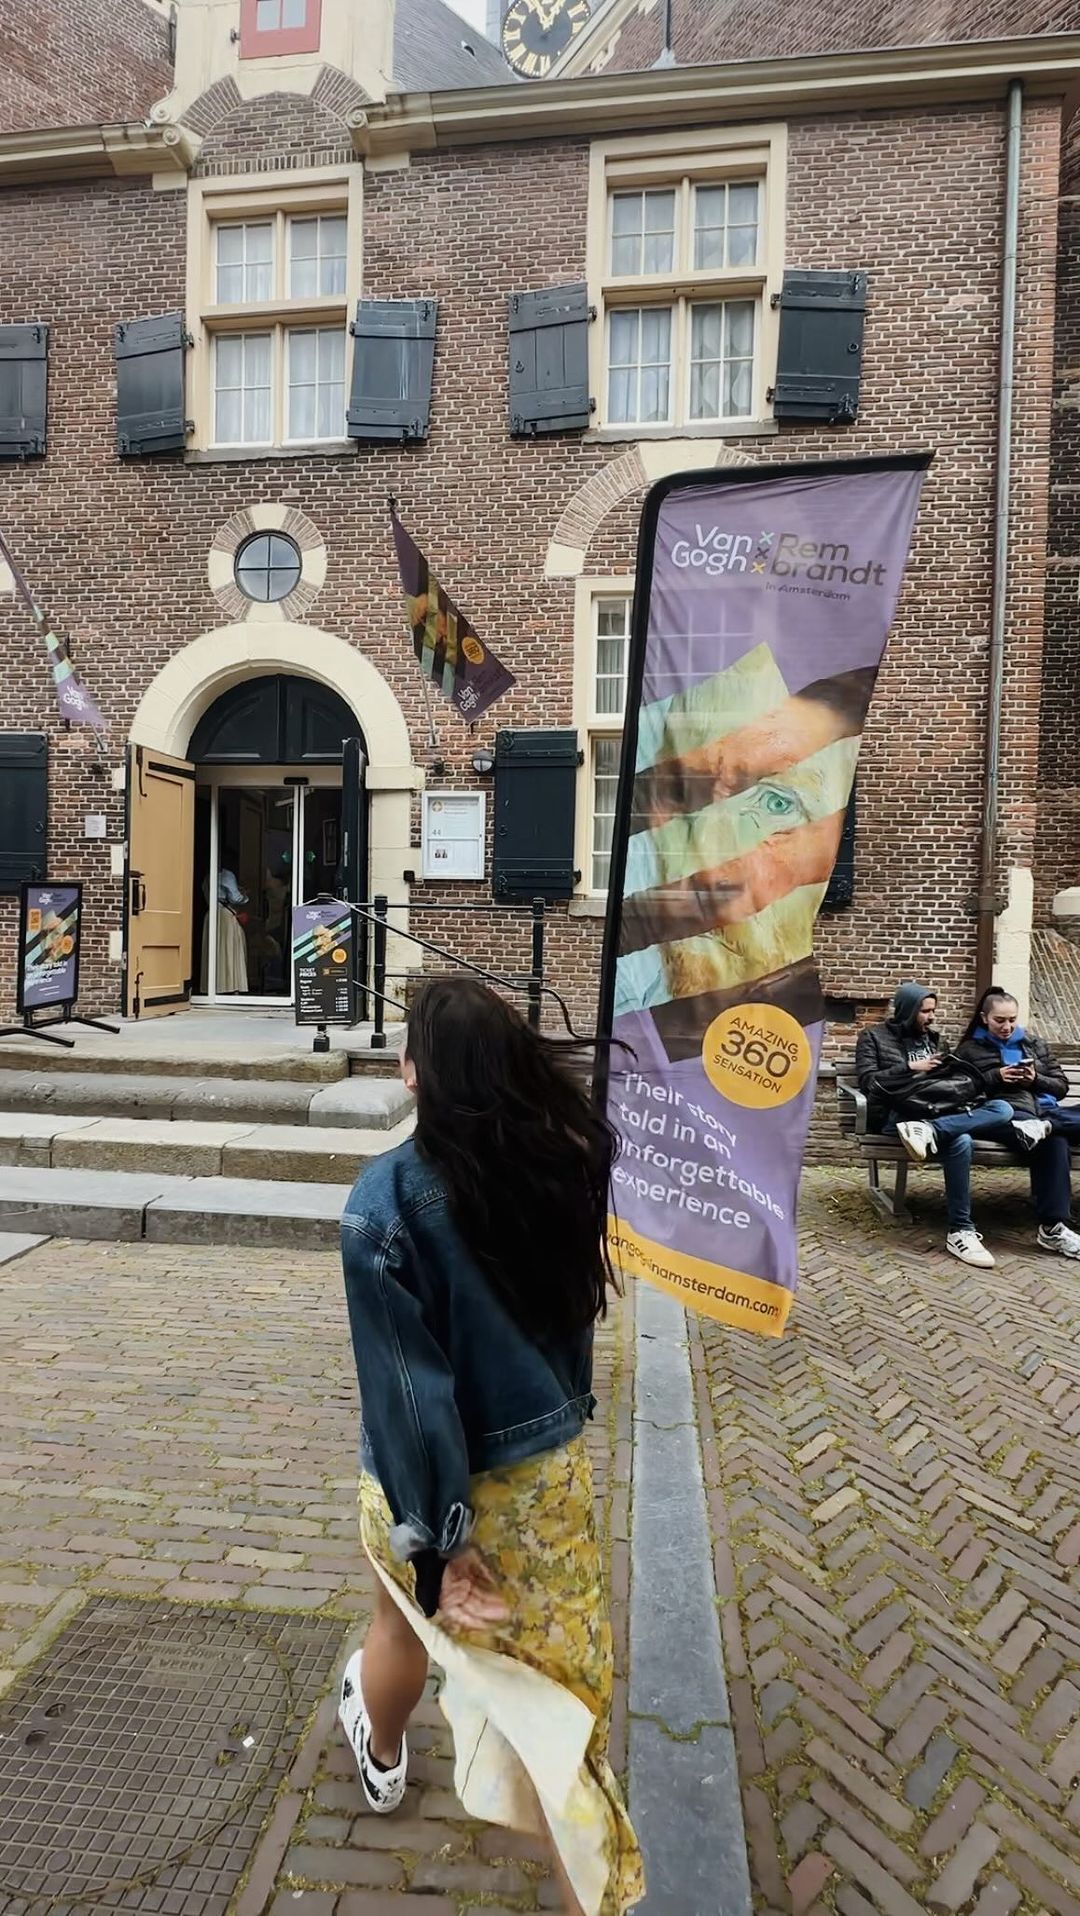 Step into the world of Dutch masters at the Van Gogh Rembrandt Experience in Noorderkerk. Immerse yourself in a 360-degree journey through the vibrant colors of Van Gogh and the dramatic shadows of Rembrandt, blending art with technology for an unforgettable adventure. 🌻🎨

@vangoghandrembrandt